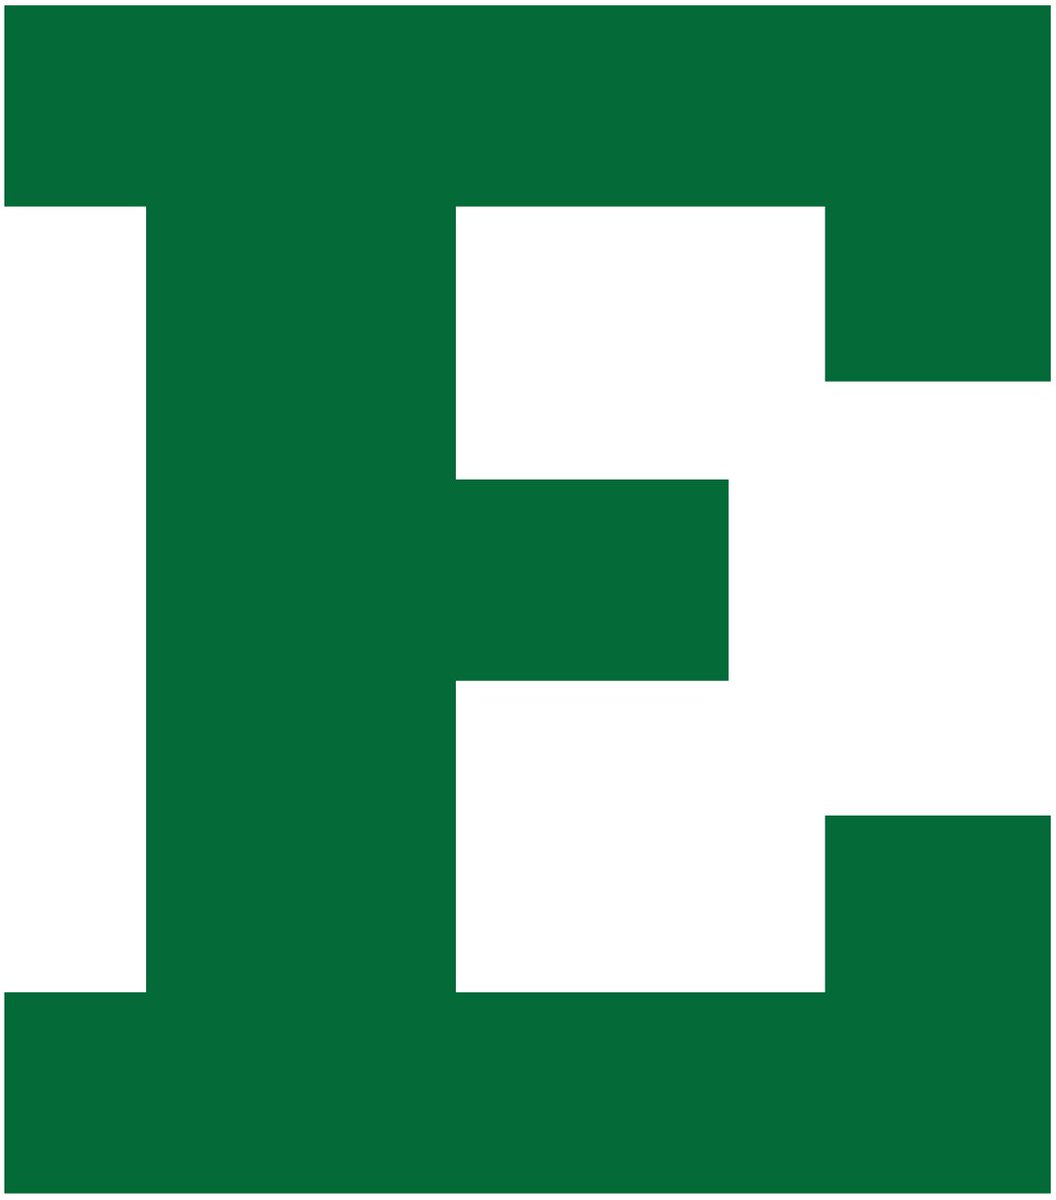 Blessed to receive a offer from Eastern Michigan University!